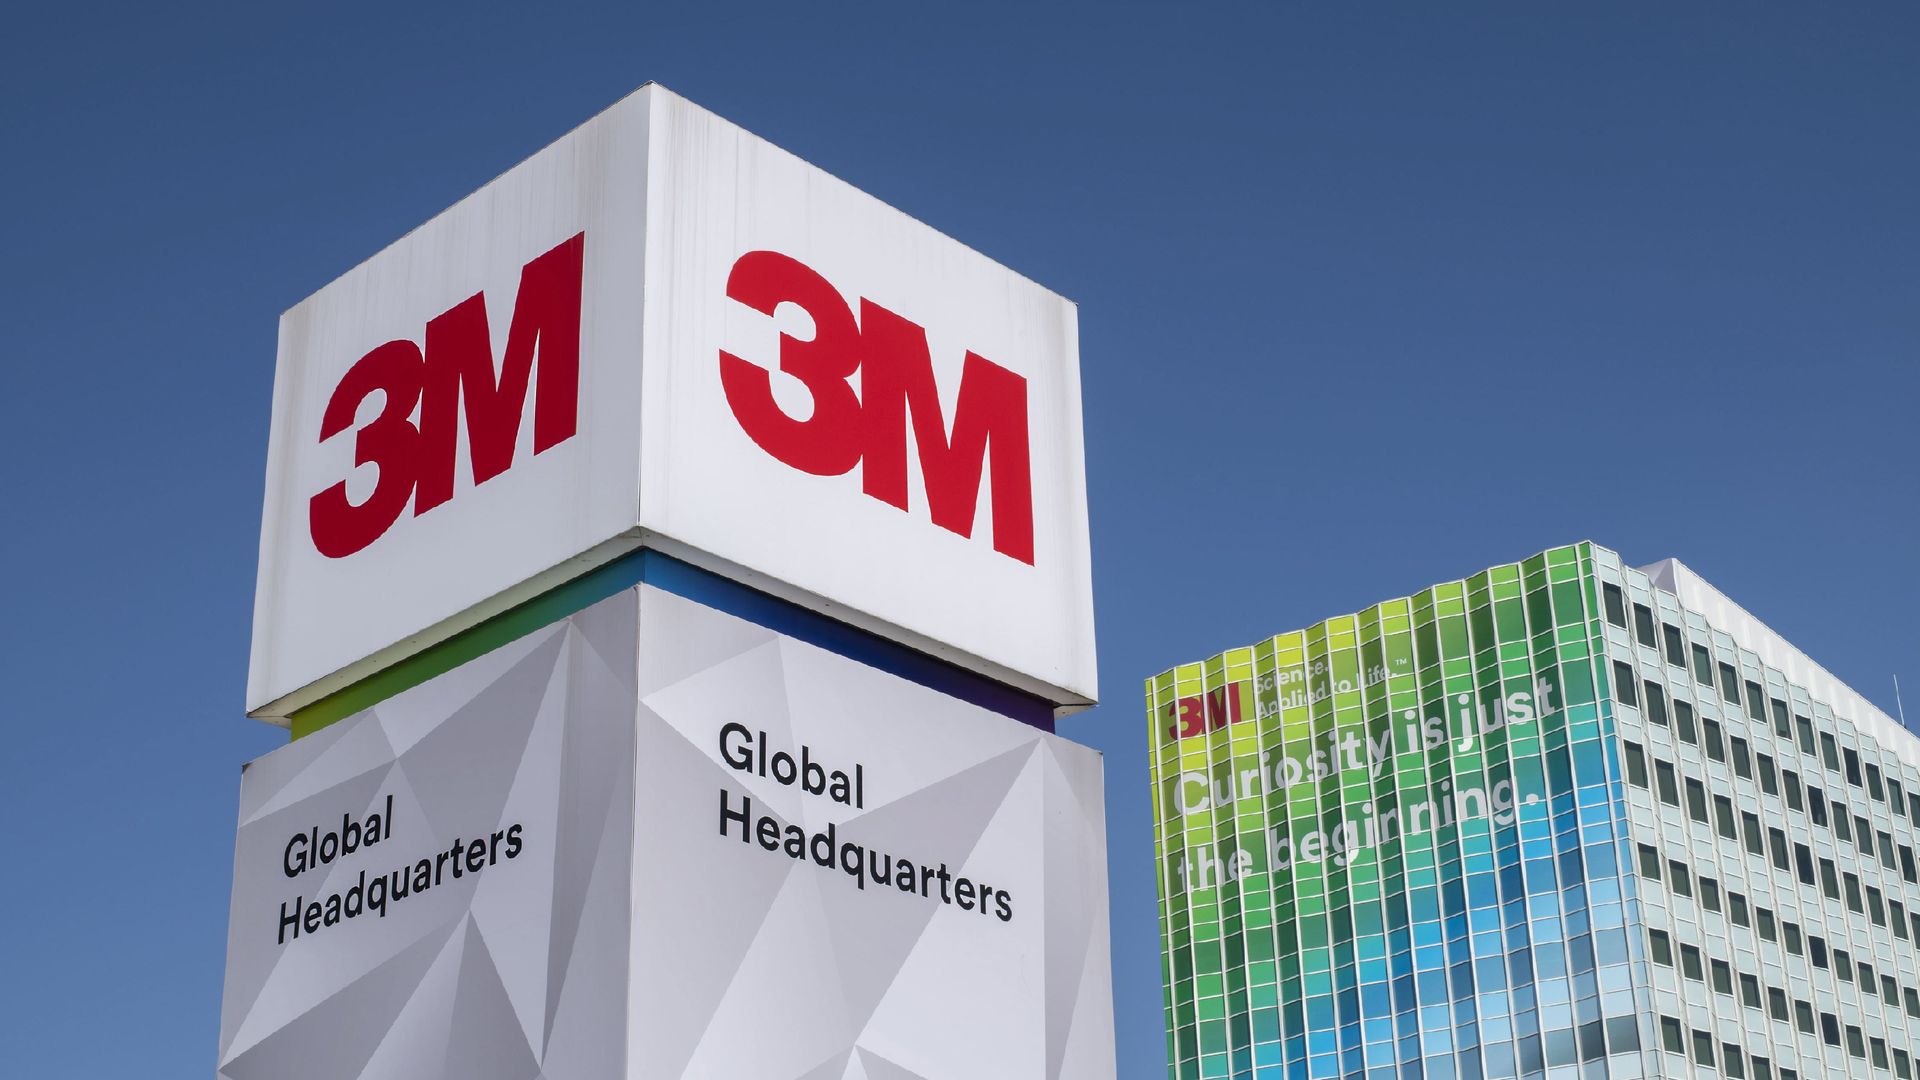 East metro officials want to make a play for 3M spinoff - Axios